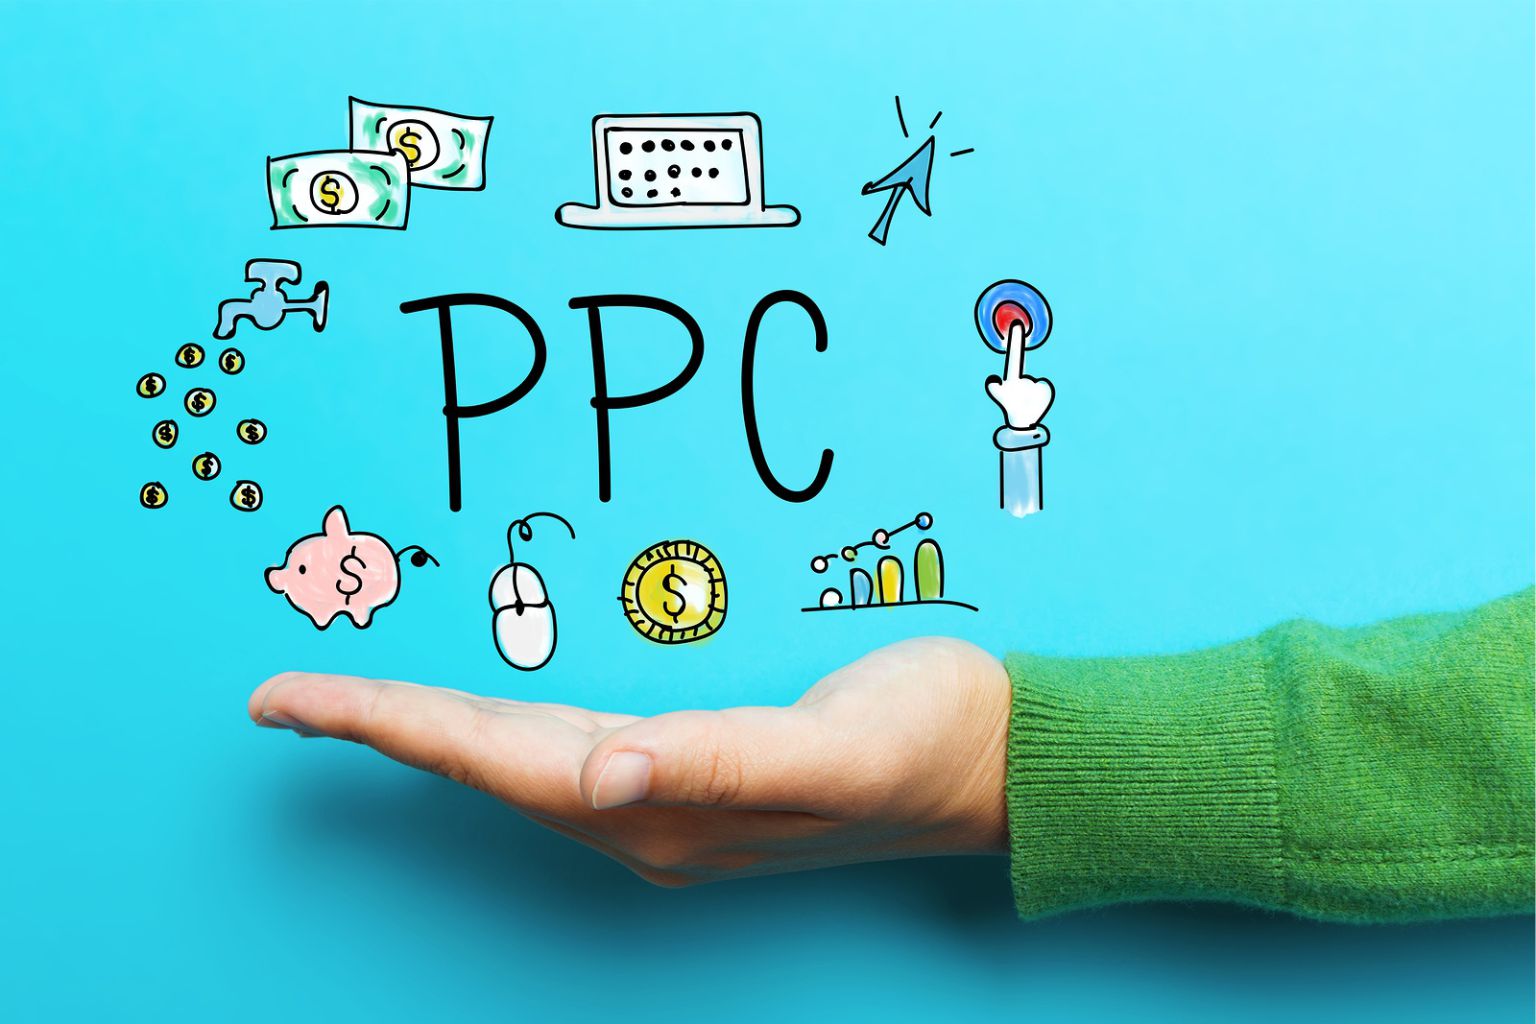 Pay-Per-Click (PPC) Advertising